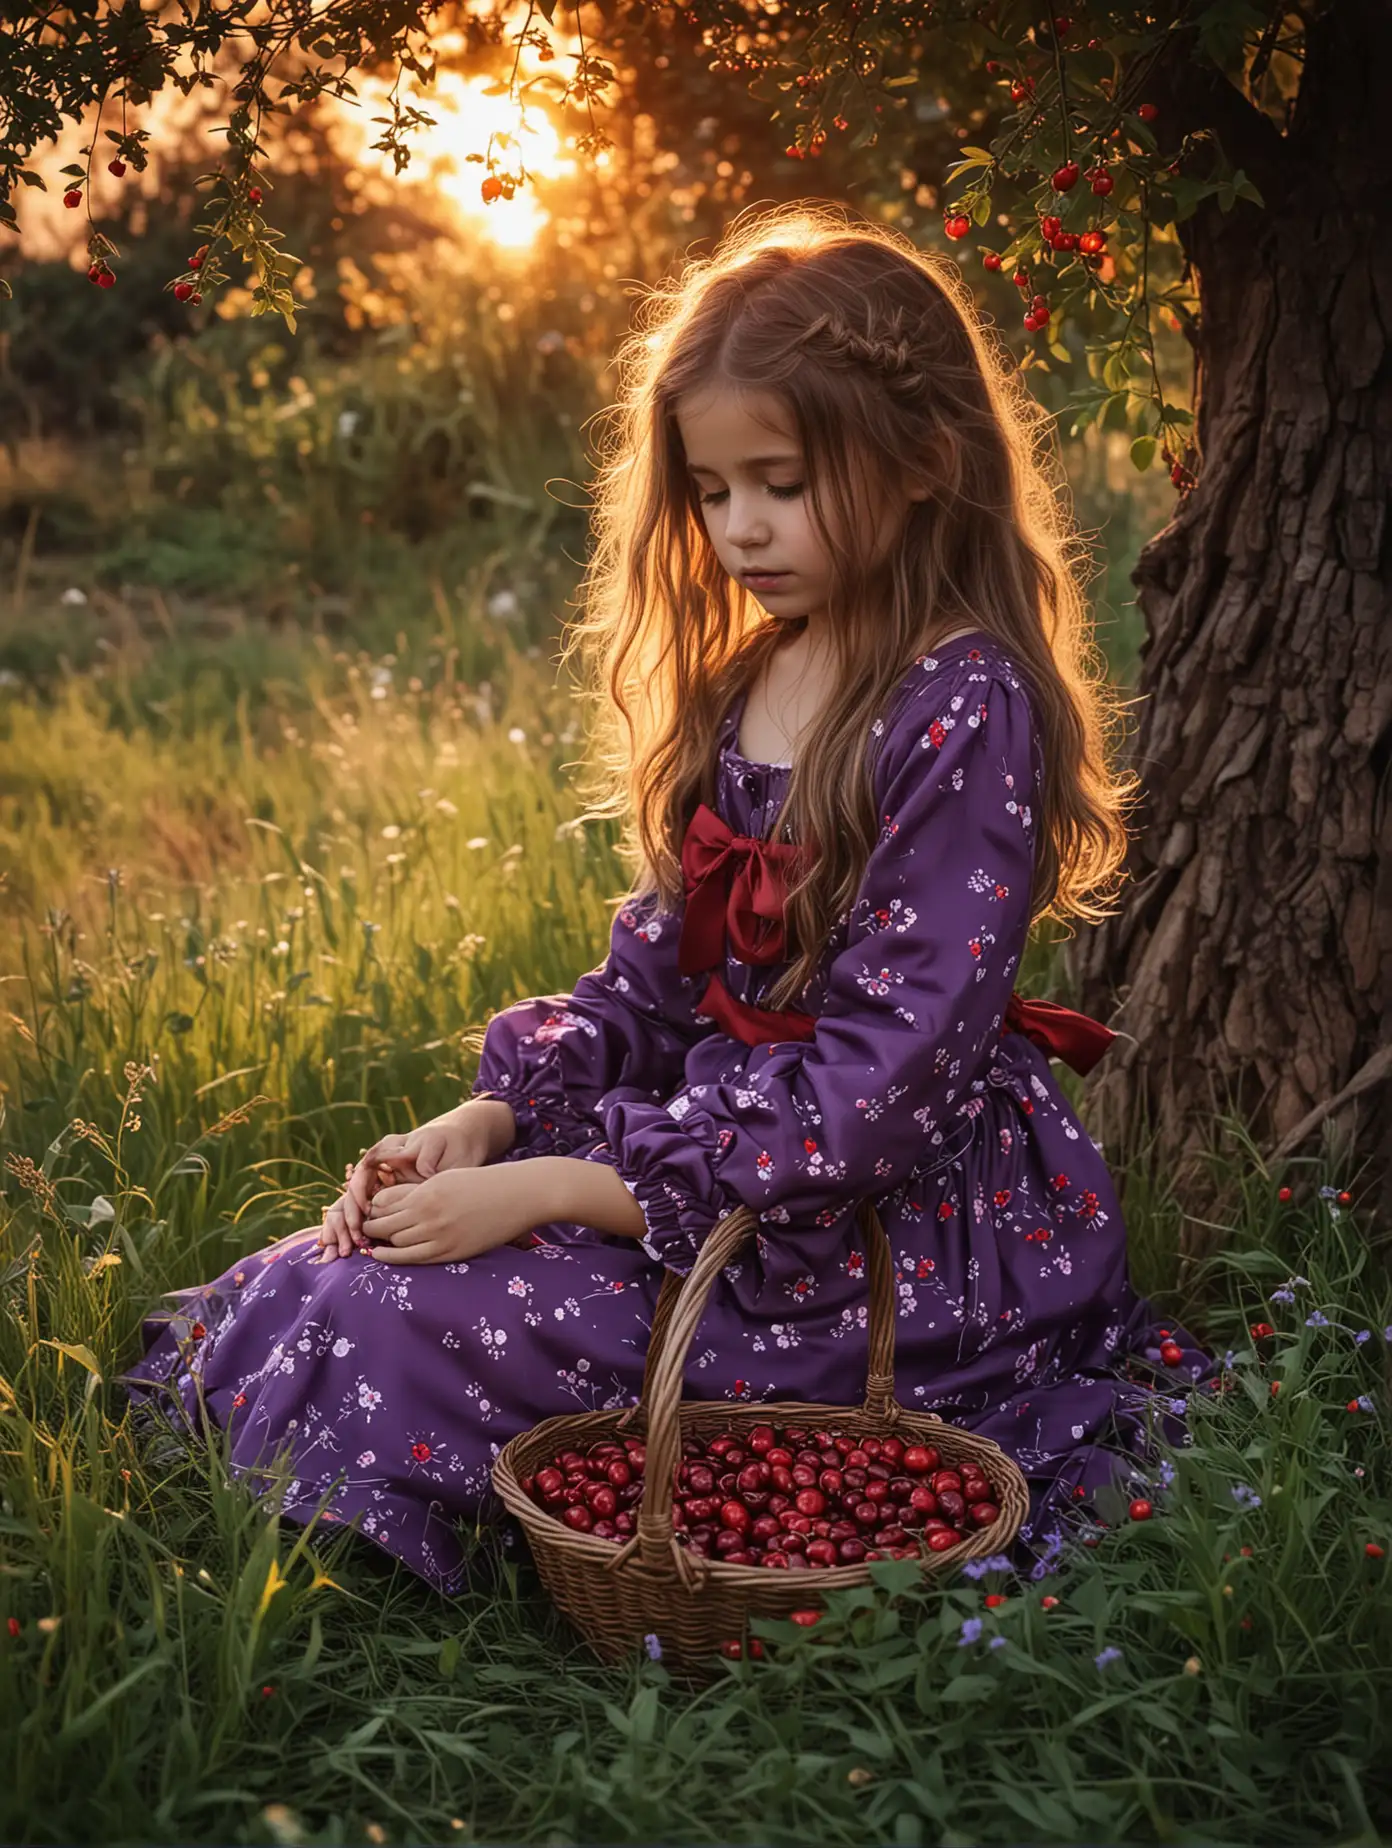 Lonely Child Sitting in High Grass Field at Sunset with Cherries and Purple Flowers